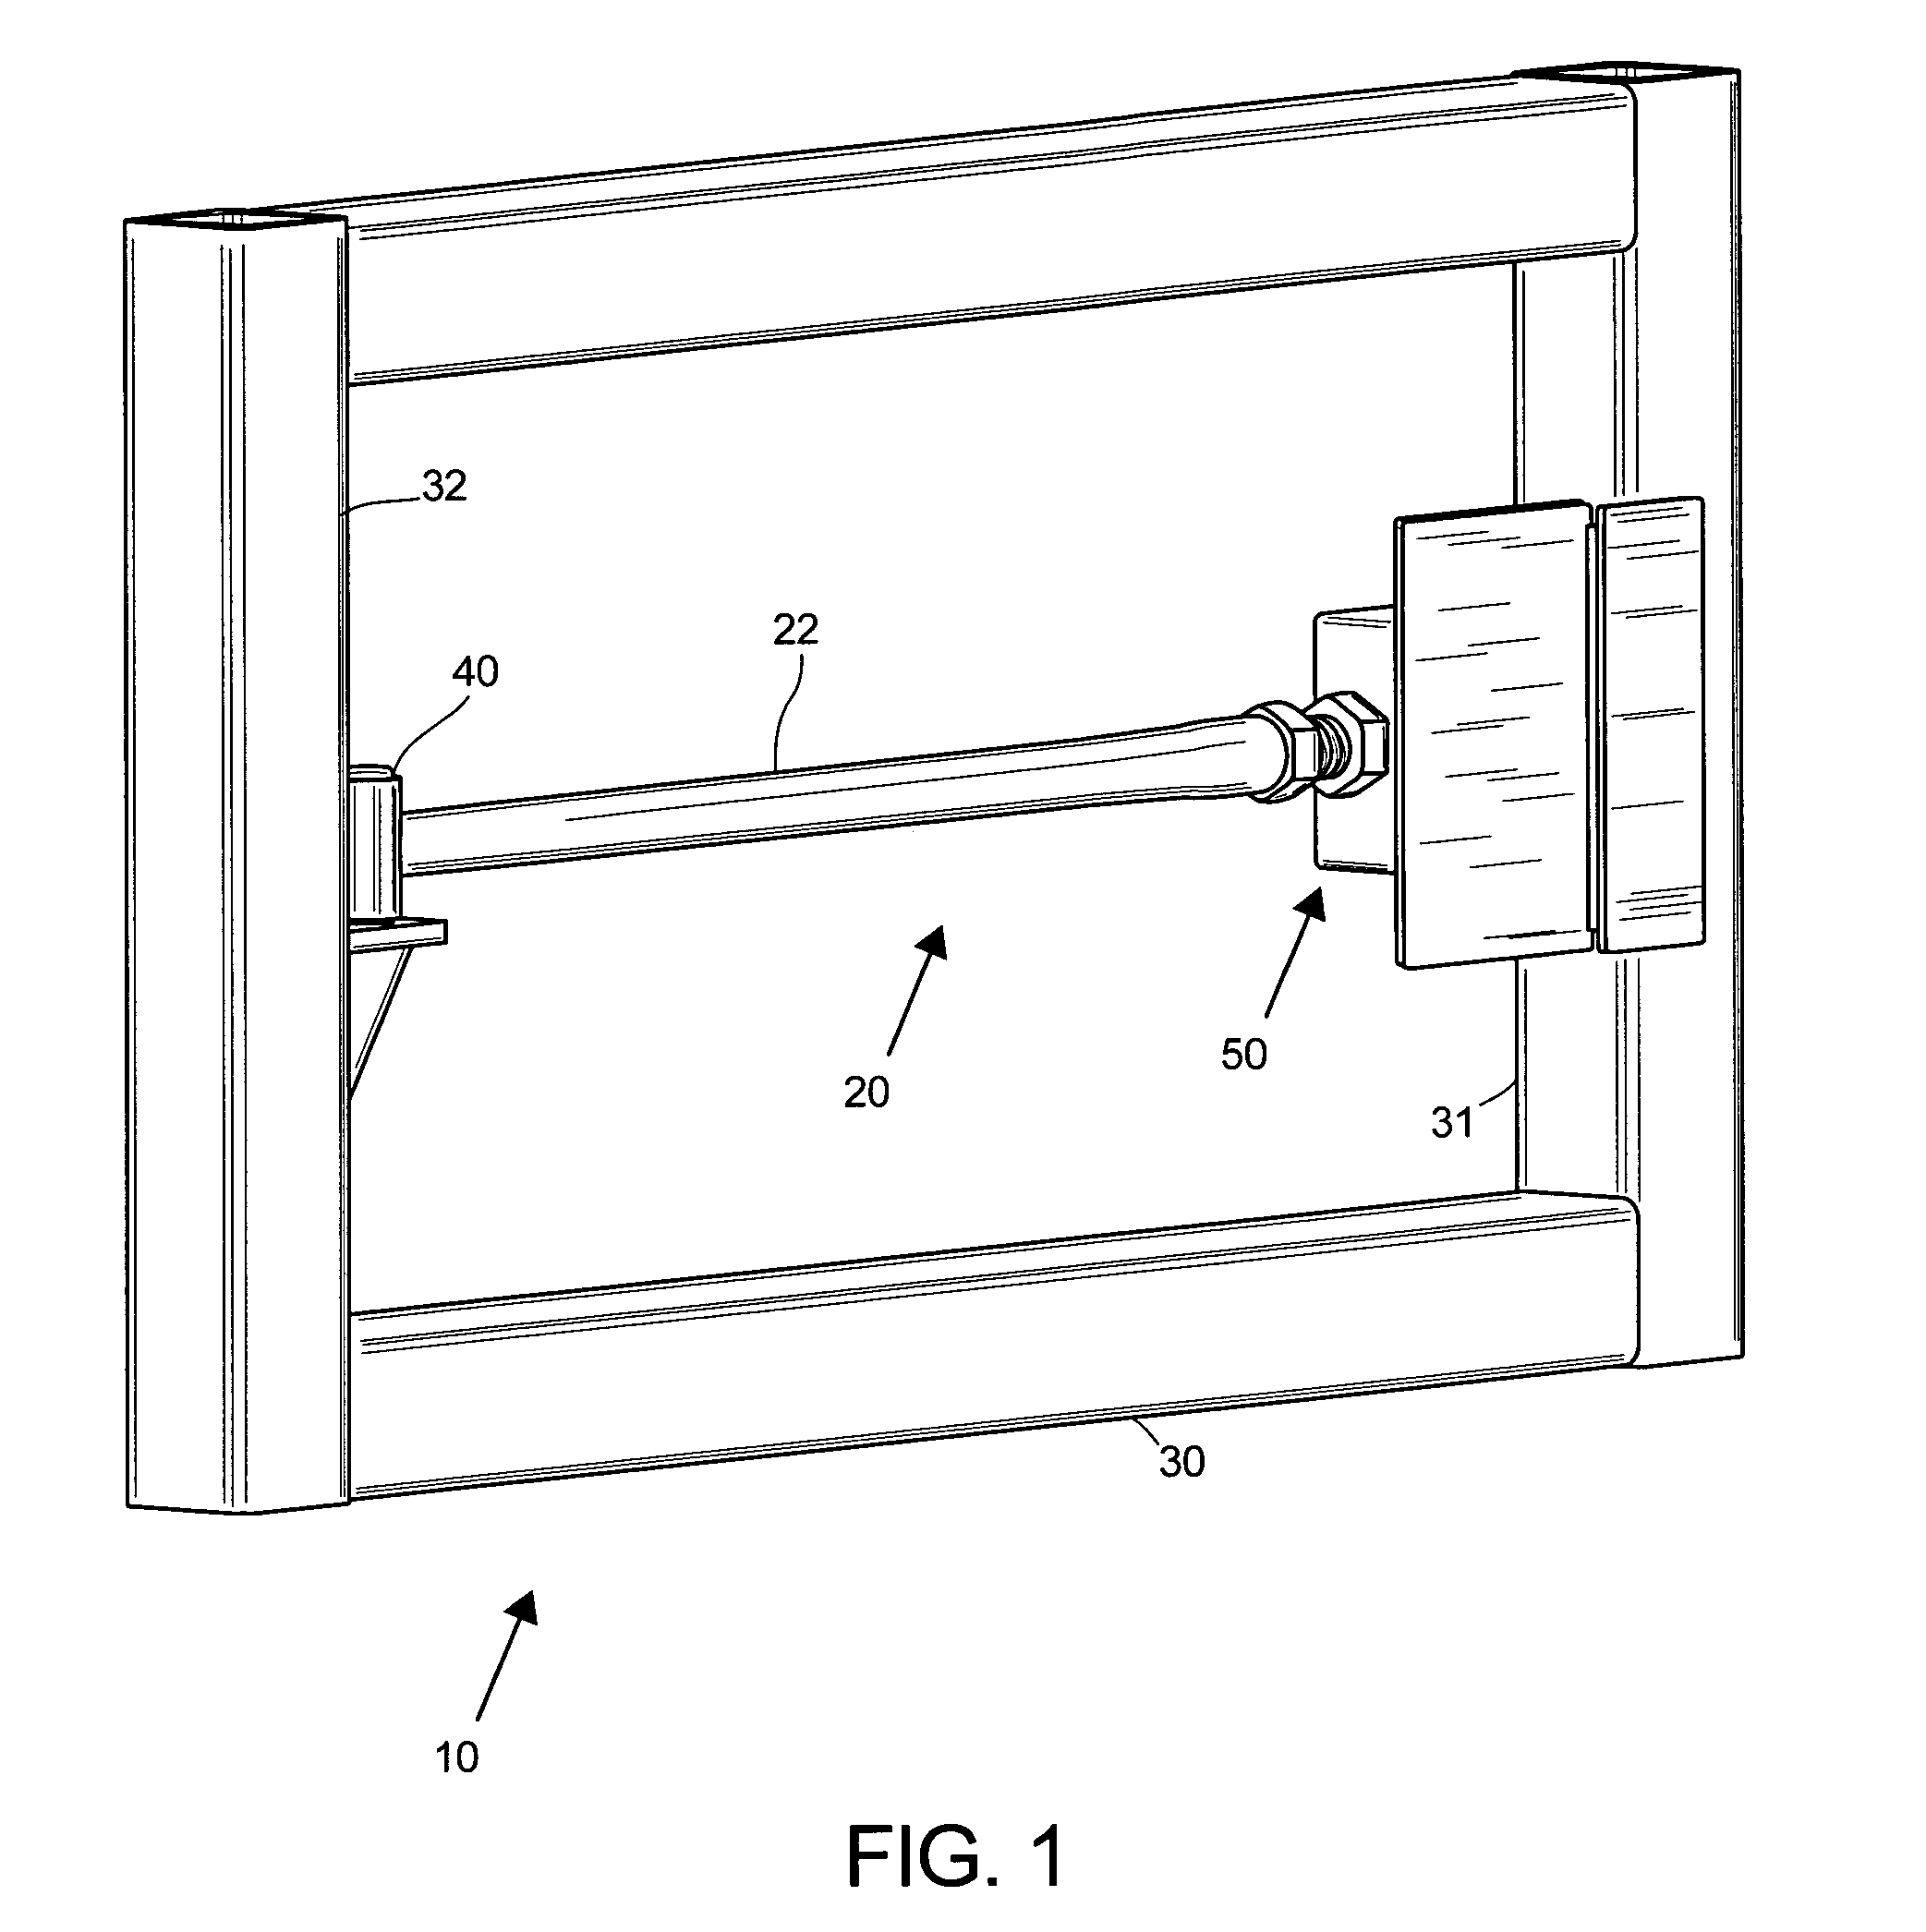 Training device for simulating the response of a locked door to the application of a blunt force